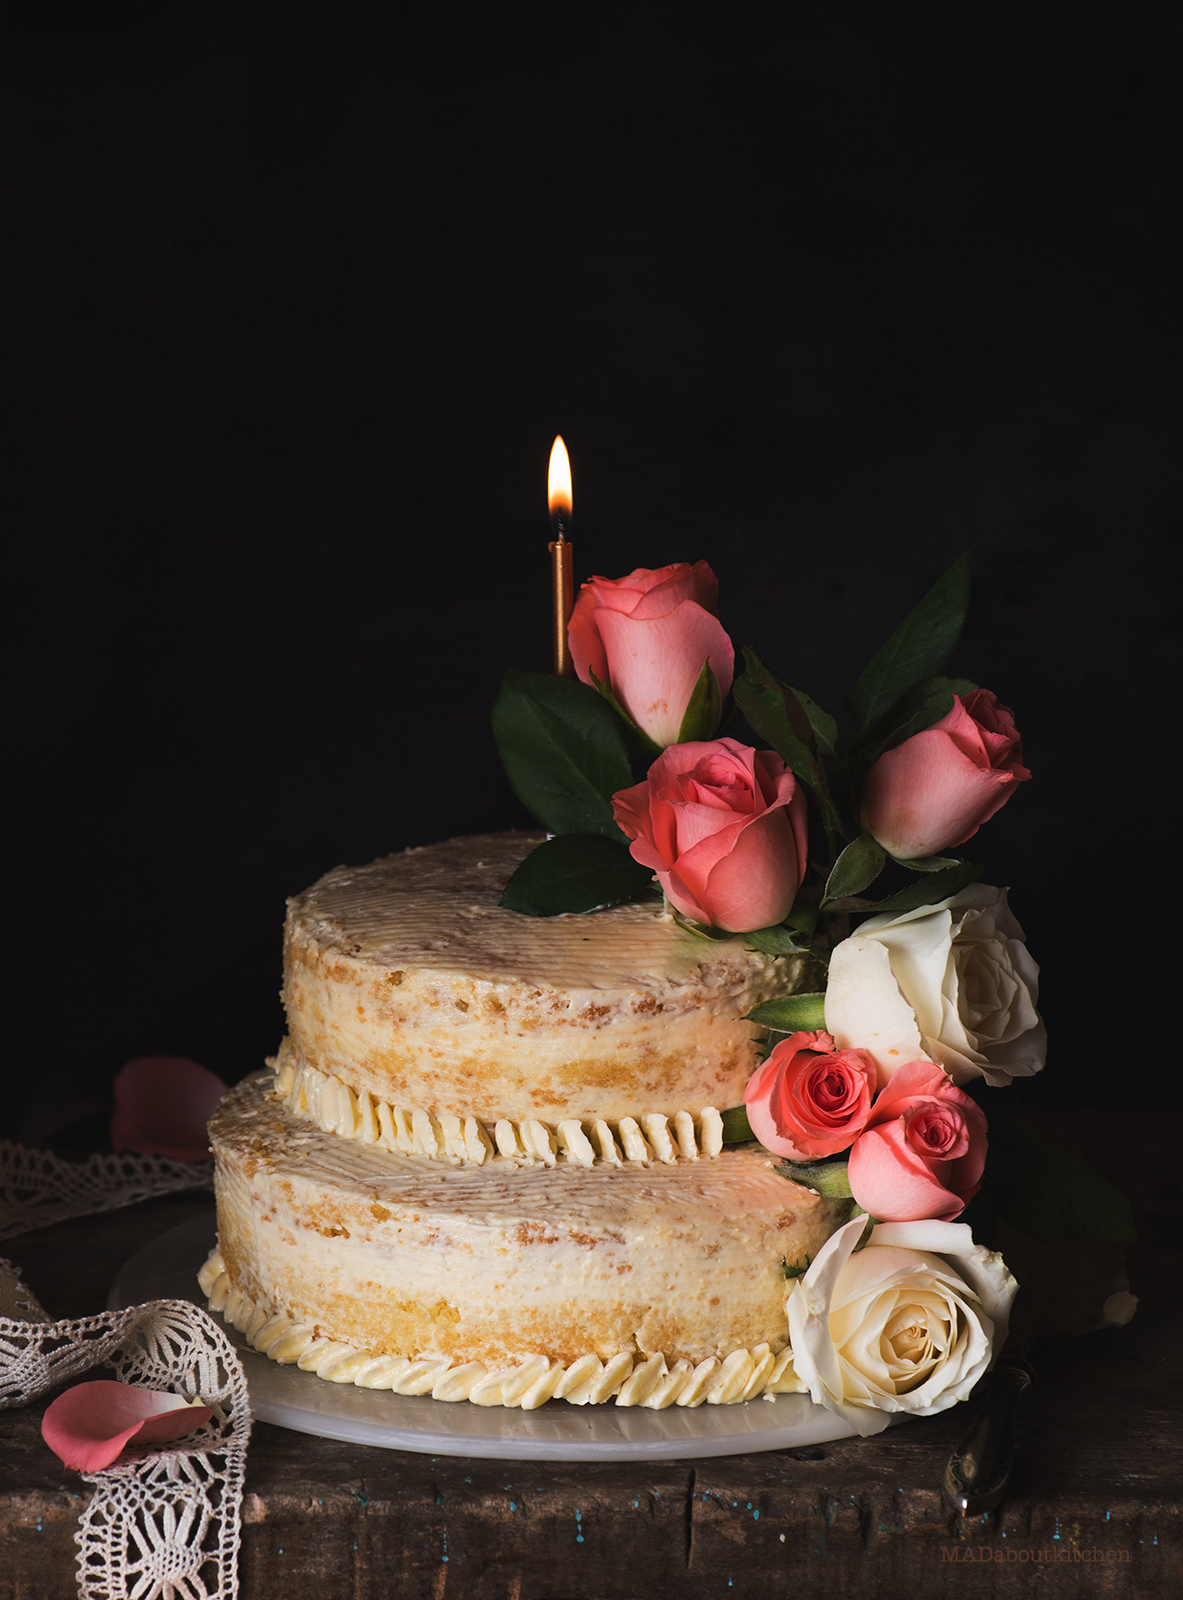 Rose cake is a simple cake with mild flavours and tastes heavenly. Rose flavoured cake with rose butter cream.